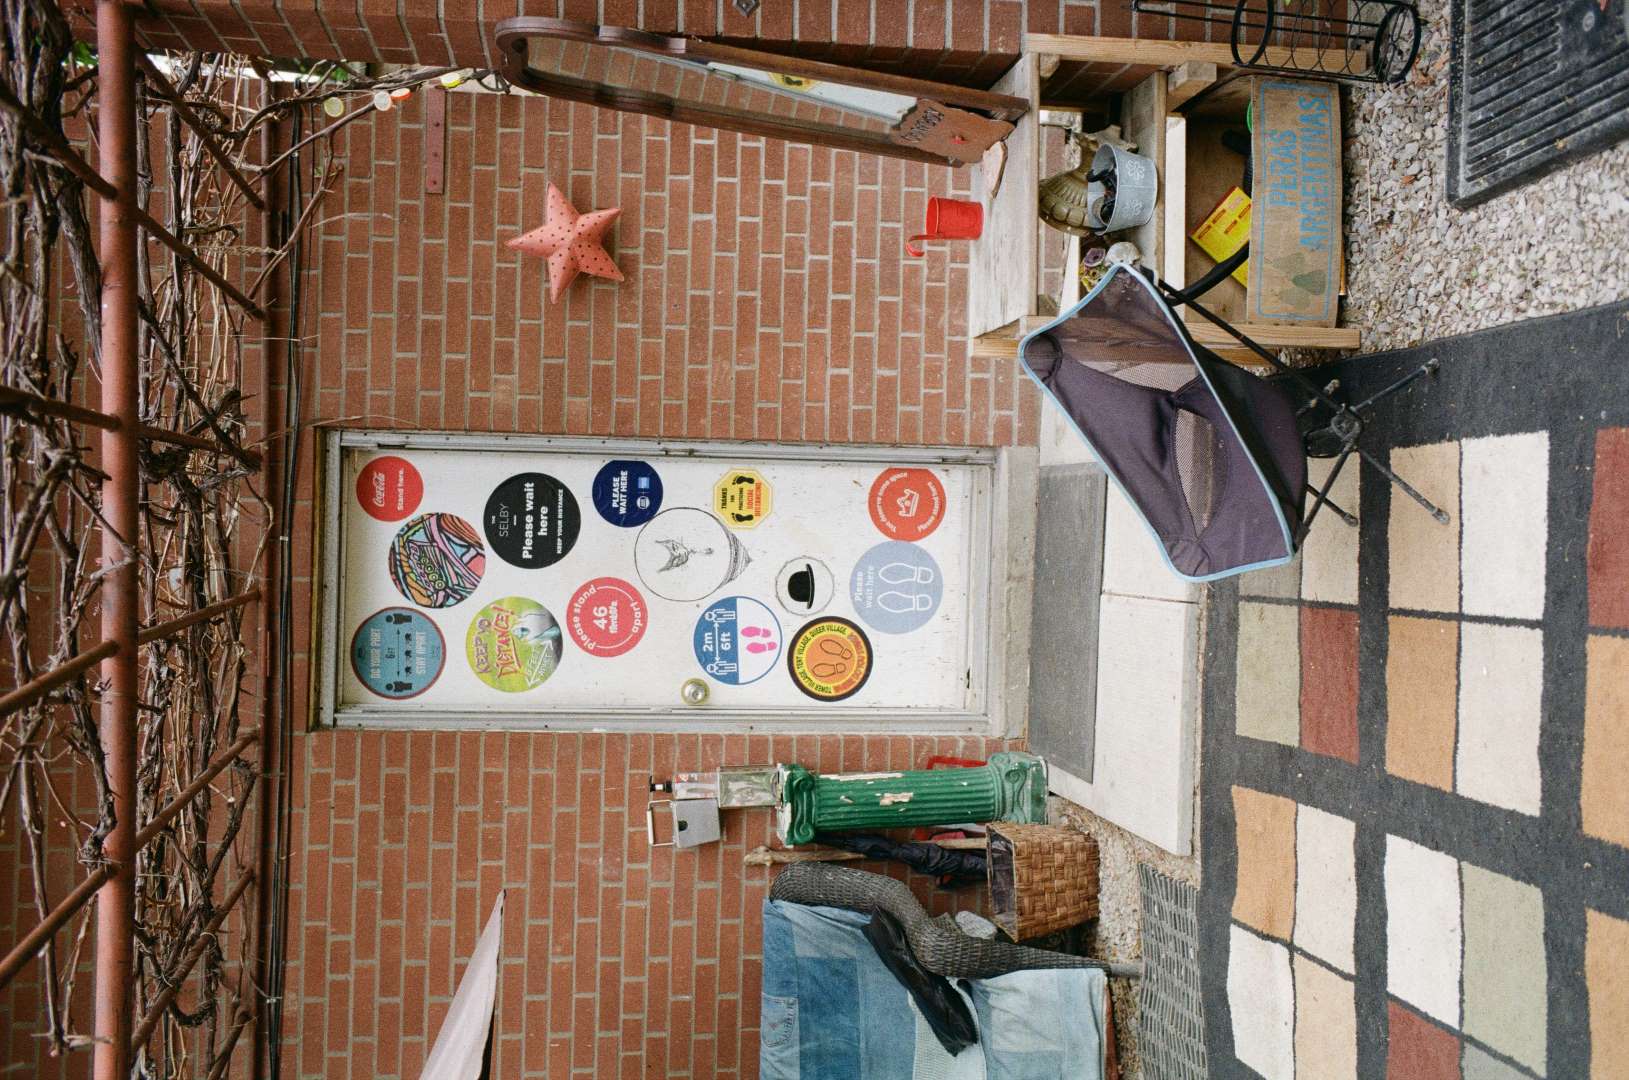 A colour photograph of a backdoor with 2 meter spacing indicators from early in the pandemic